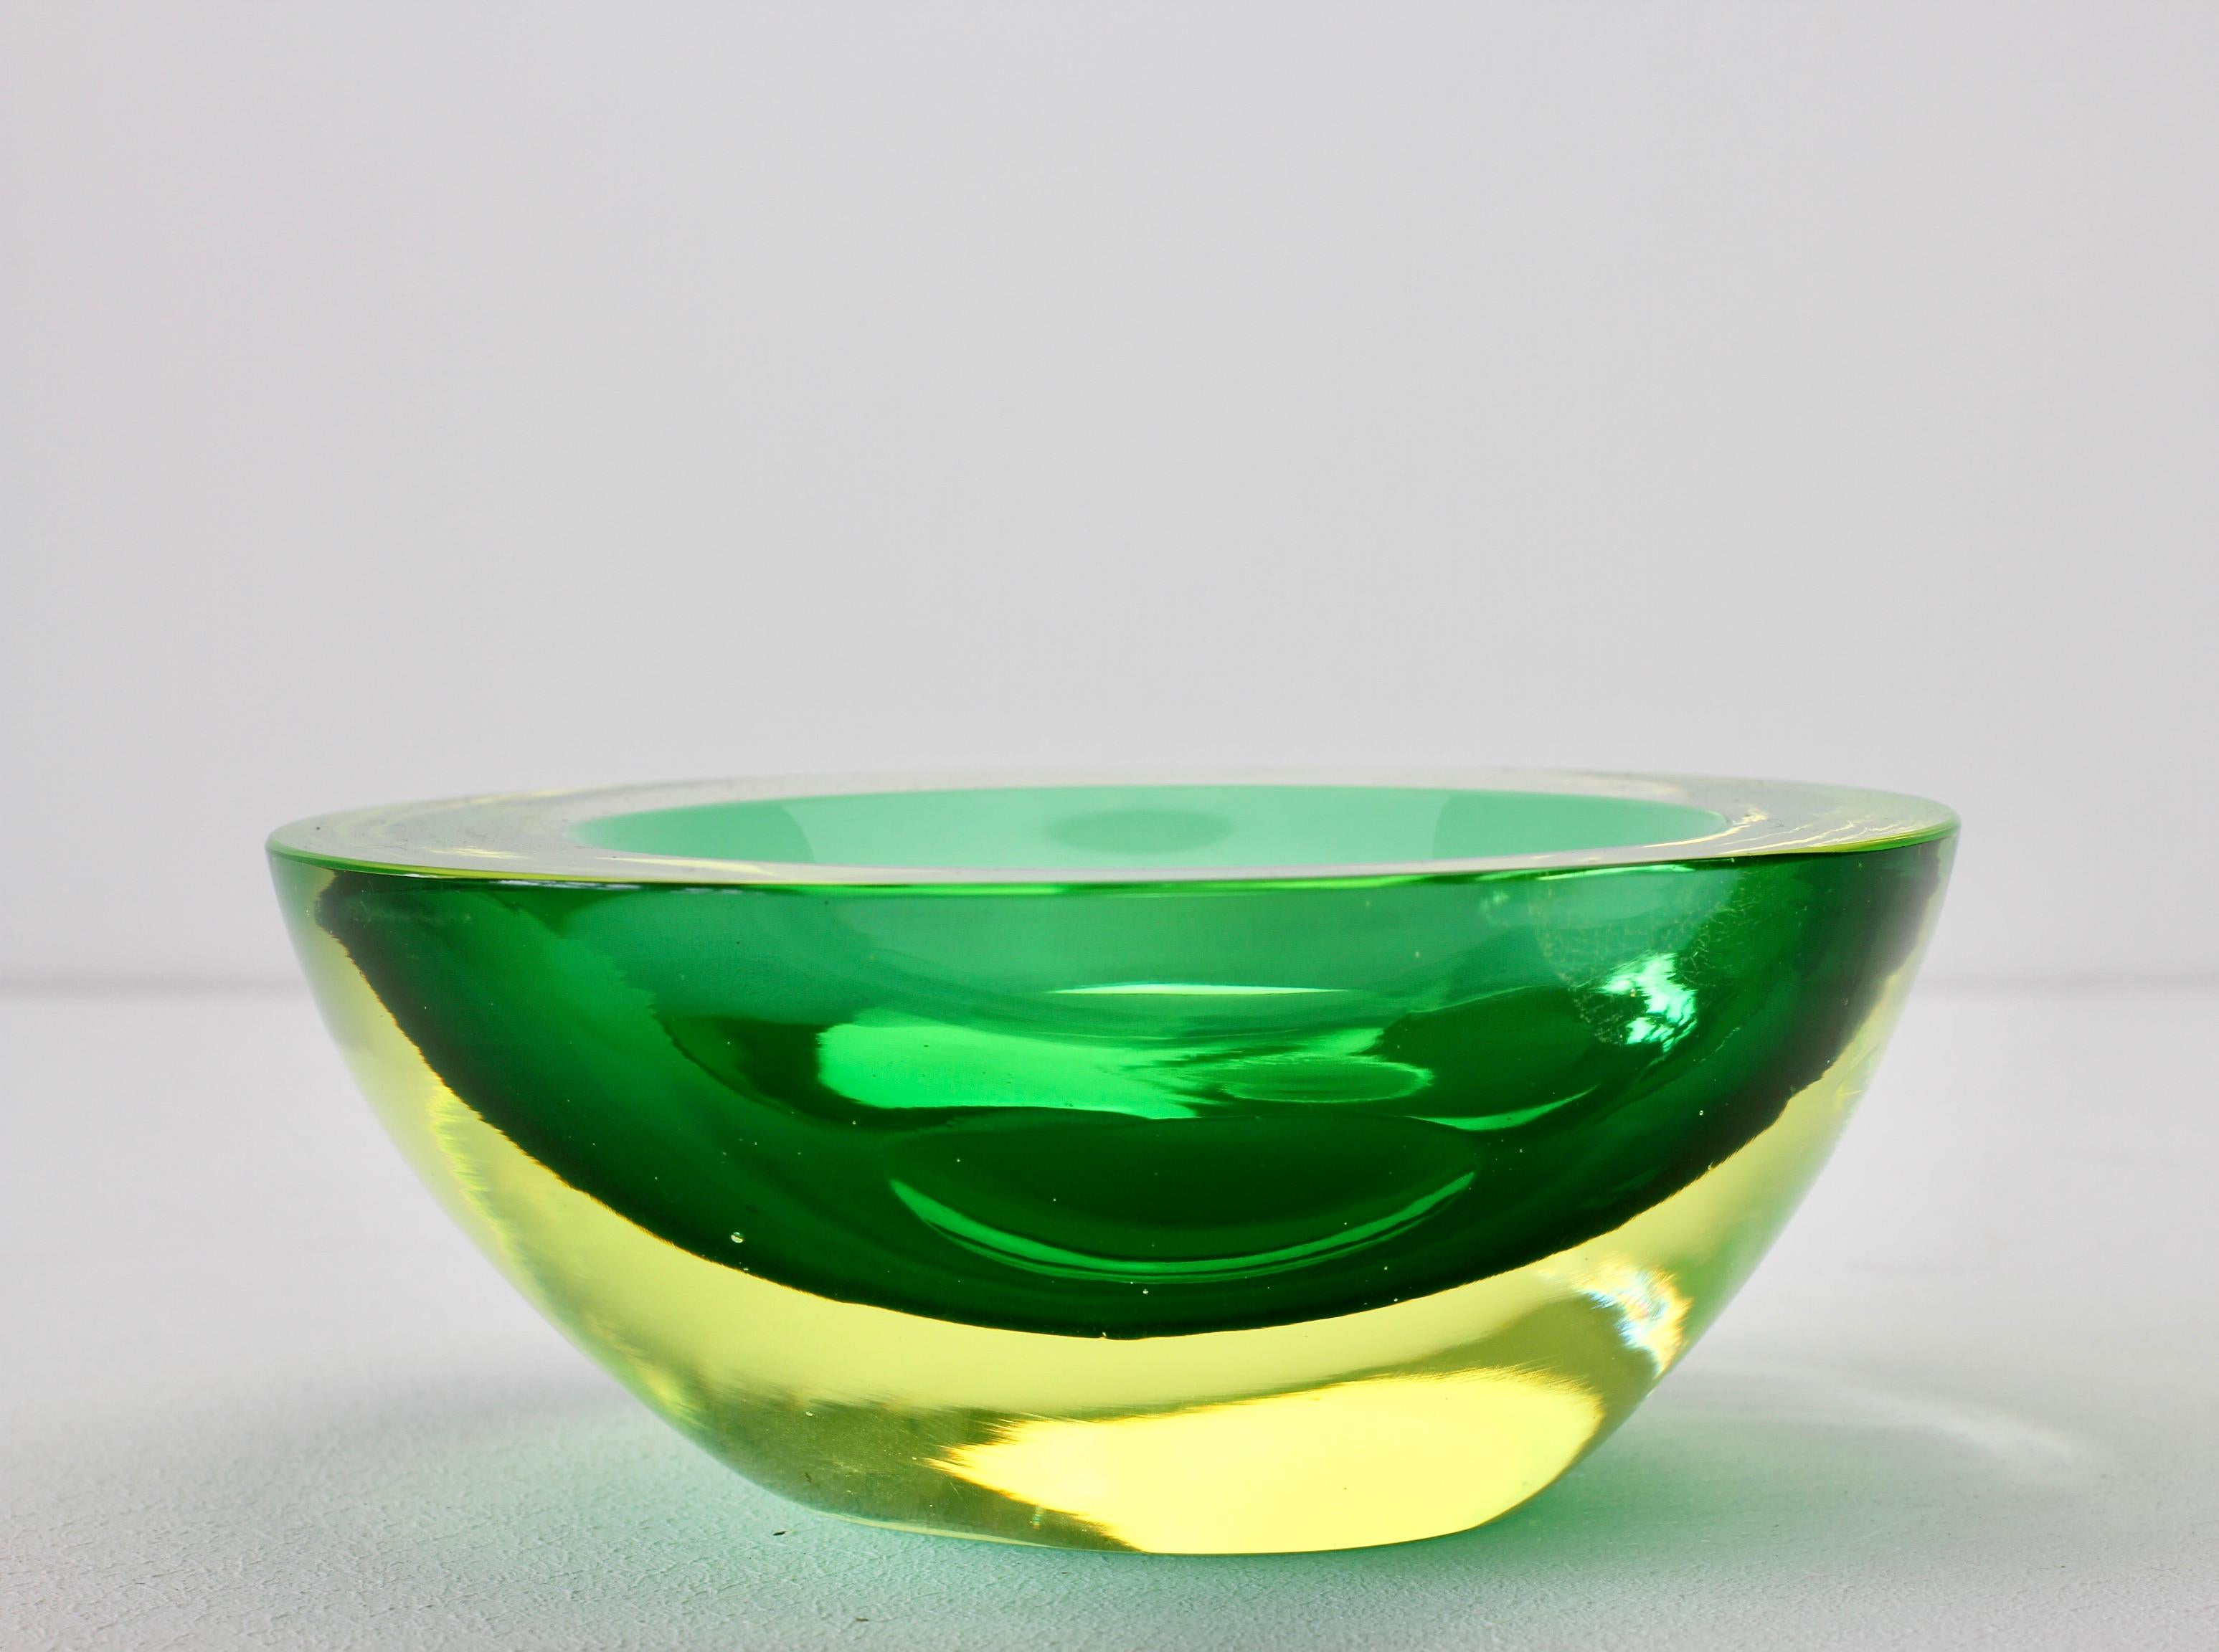 Antonio da Ros (attributed) for Cenedese large and heavy vintage Italian Murano glass bowl, serving dish or ashtray, circa 1965-1975. Utilizing the Sommerso technique this large vintage Mid-Century Modern piece of glass features an asymmetric design